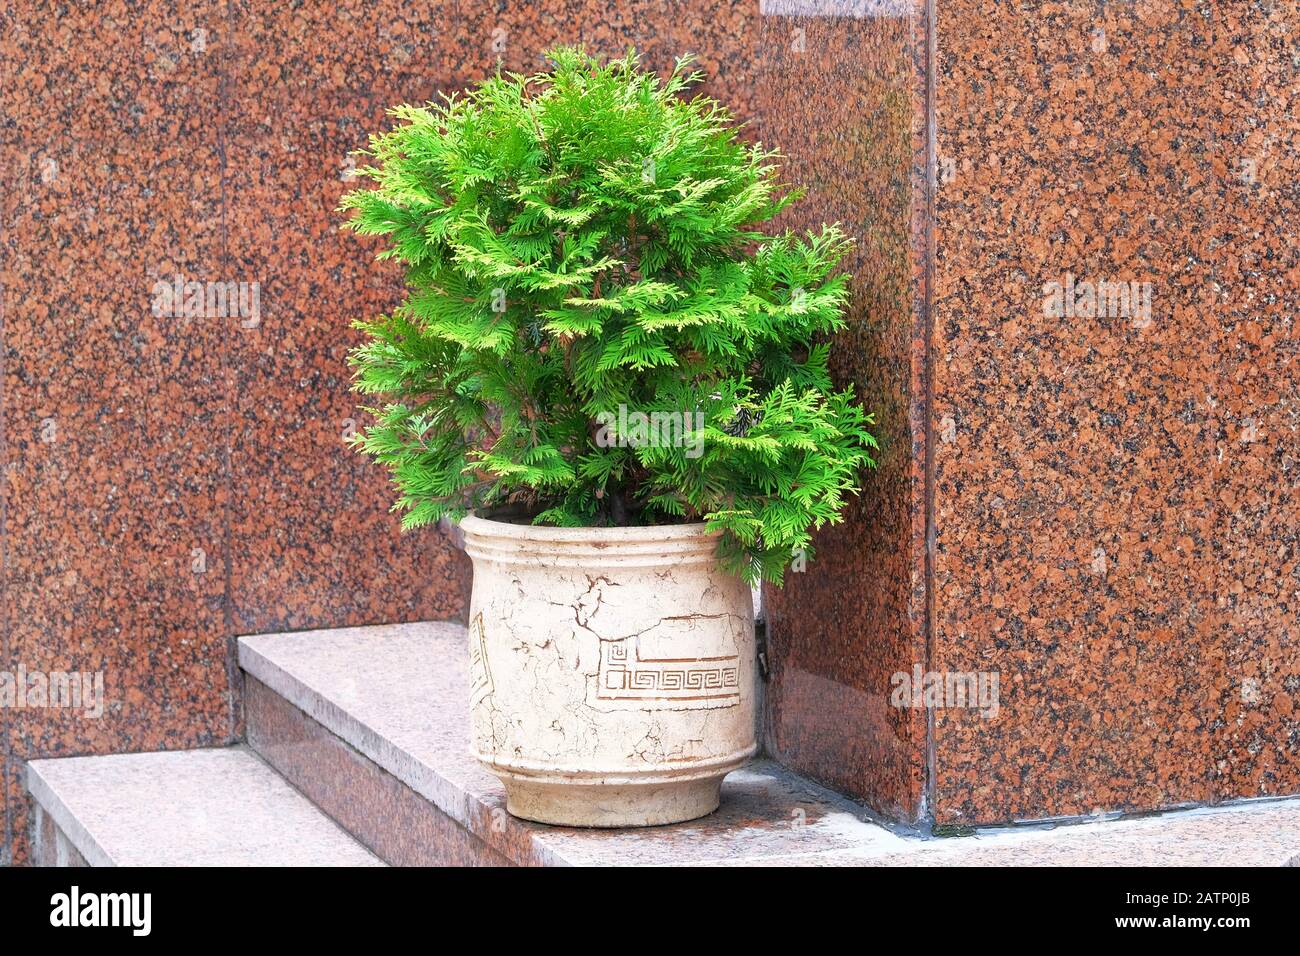 Cypress in outdoors pot. Thuja occidentalis danica in container, coniferous trees. Landscape design in city. Stock Photo